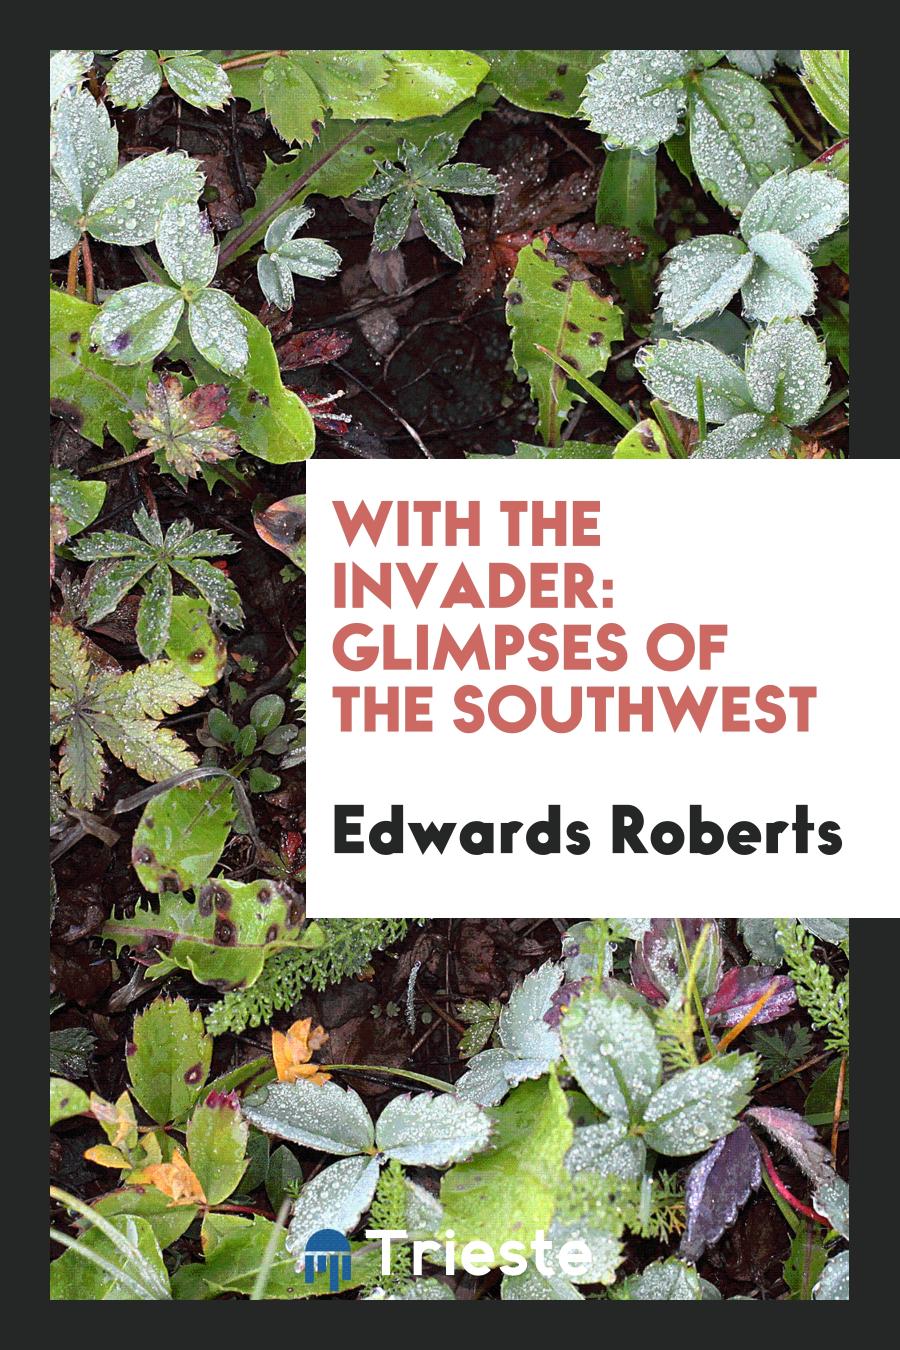 With the Invader: Glimpses of the Southwest